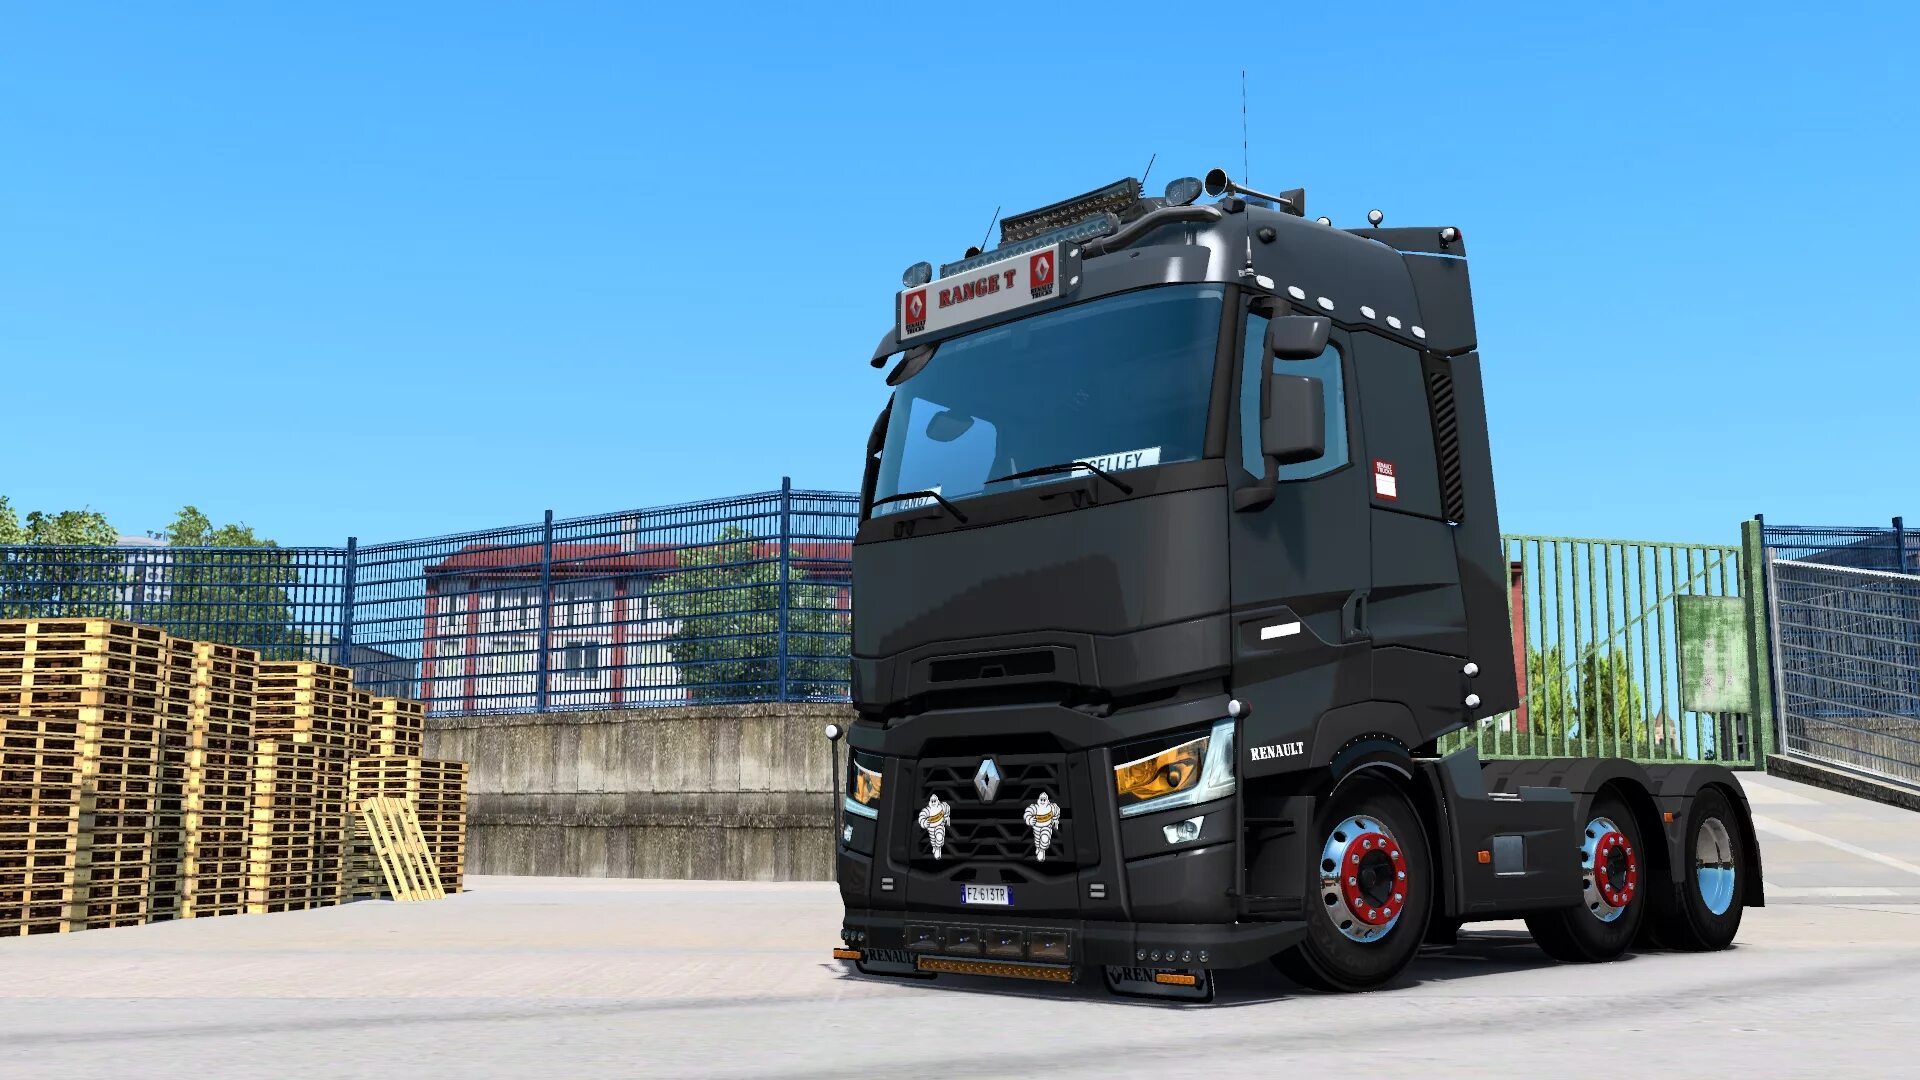 Ets 2 renault. Renault t ETS 2. Renault t EVO 2022. Renault t 2021 ets2. ETS 2 Renault t Tuning.